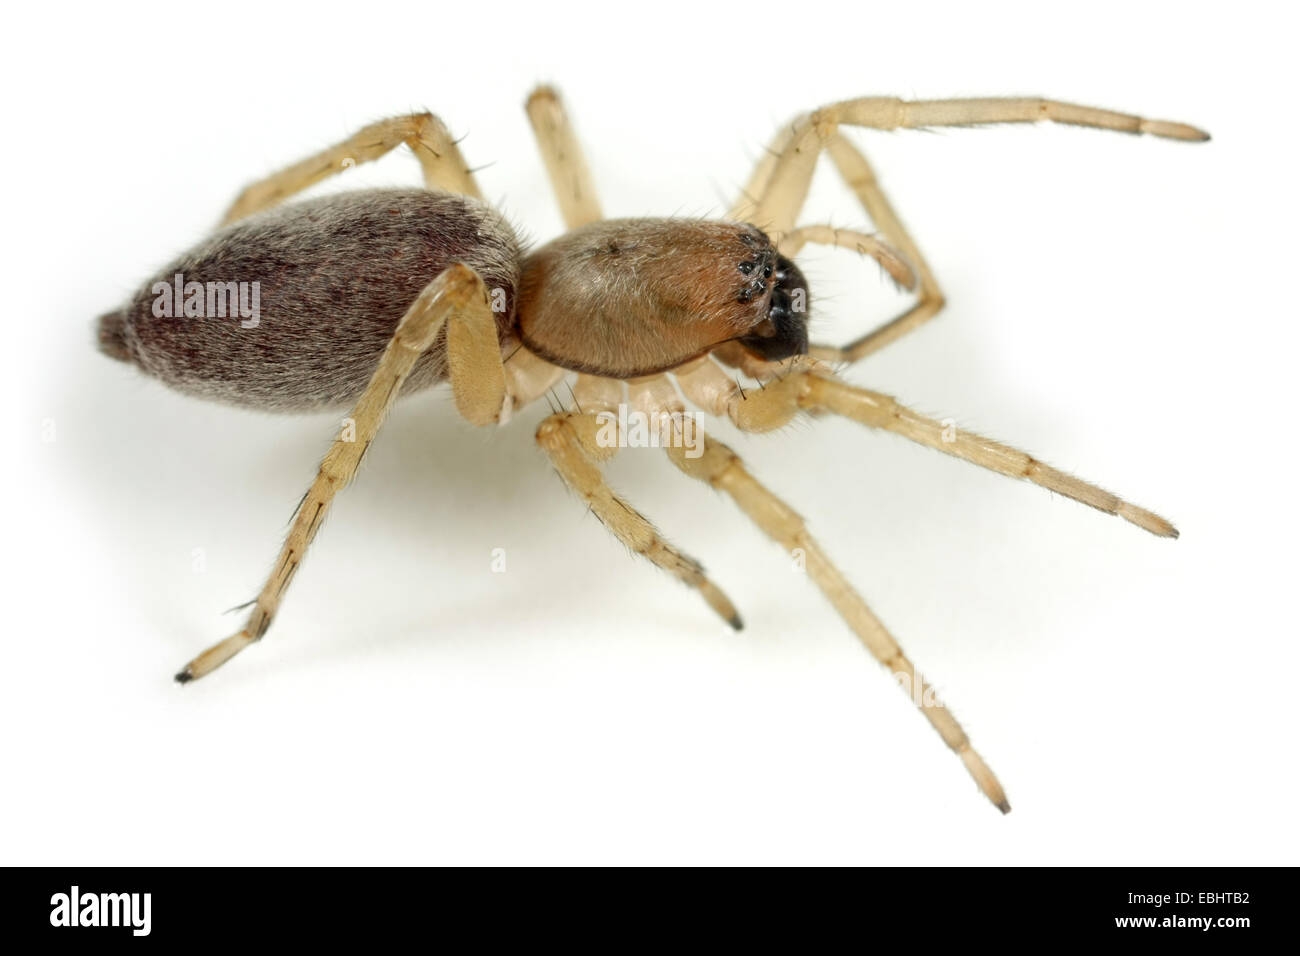 A Female Sac spider (Clubiona reclusa) on white background. Sac spiders are part of the family Clubionidae. Stock Photo